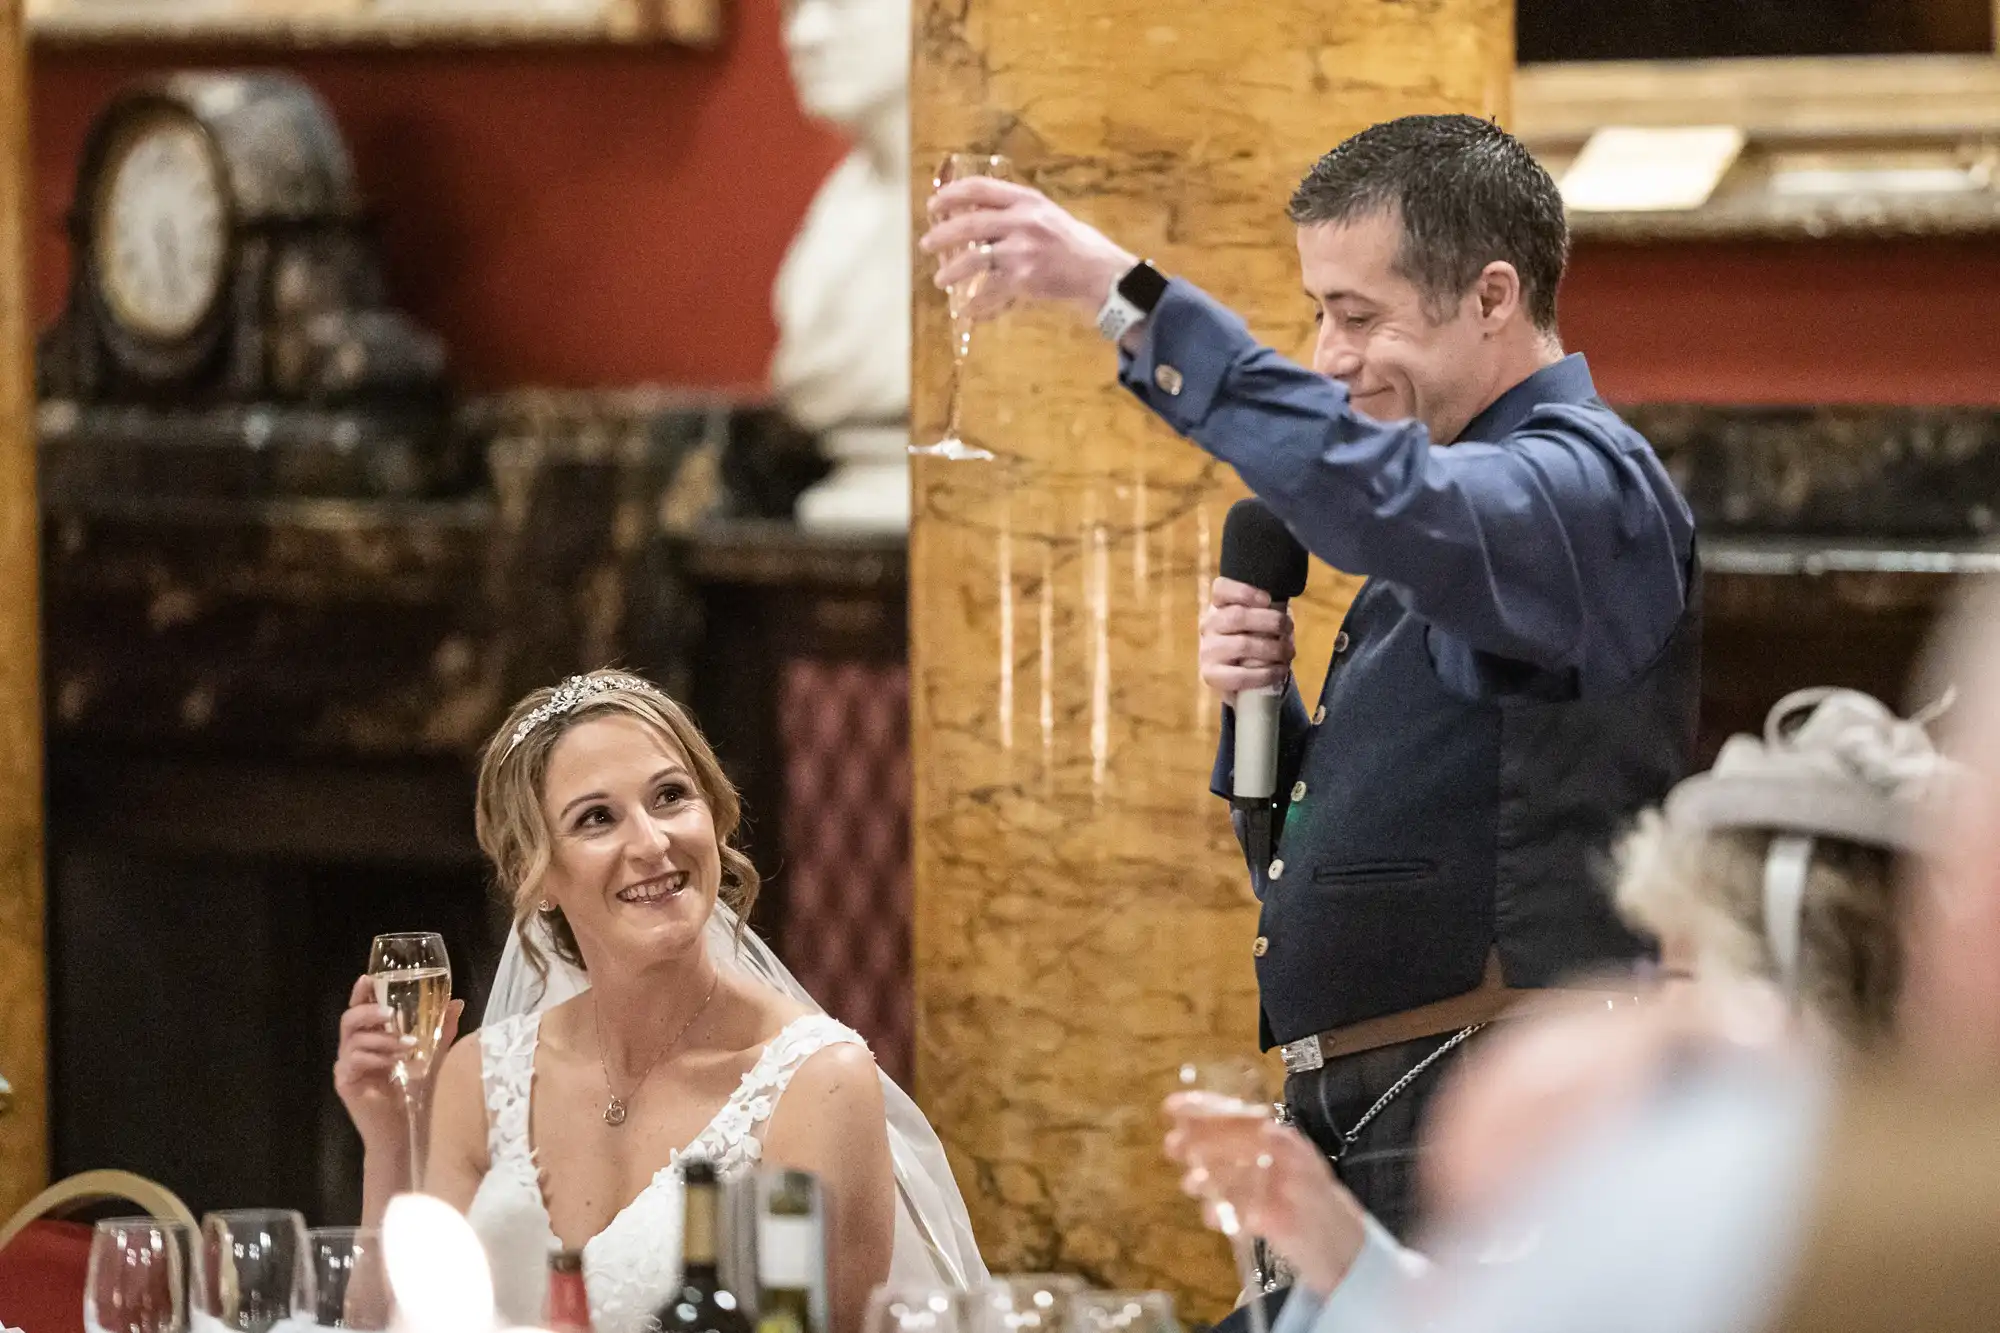 A groom gives a speech holding a microphone and champagne flute, while the bride in a white dress and veil looks at him smiling, sitting at a table with bottles and glasses.